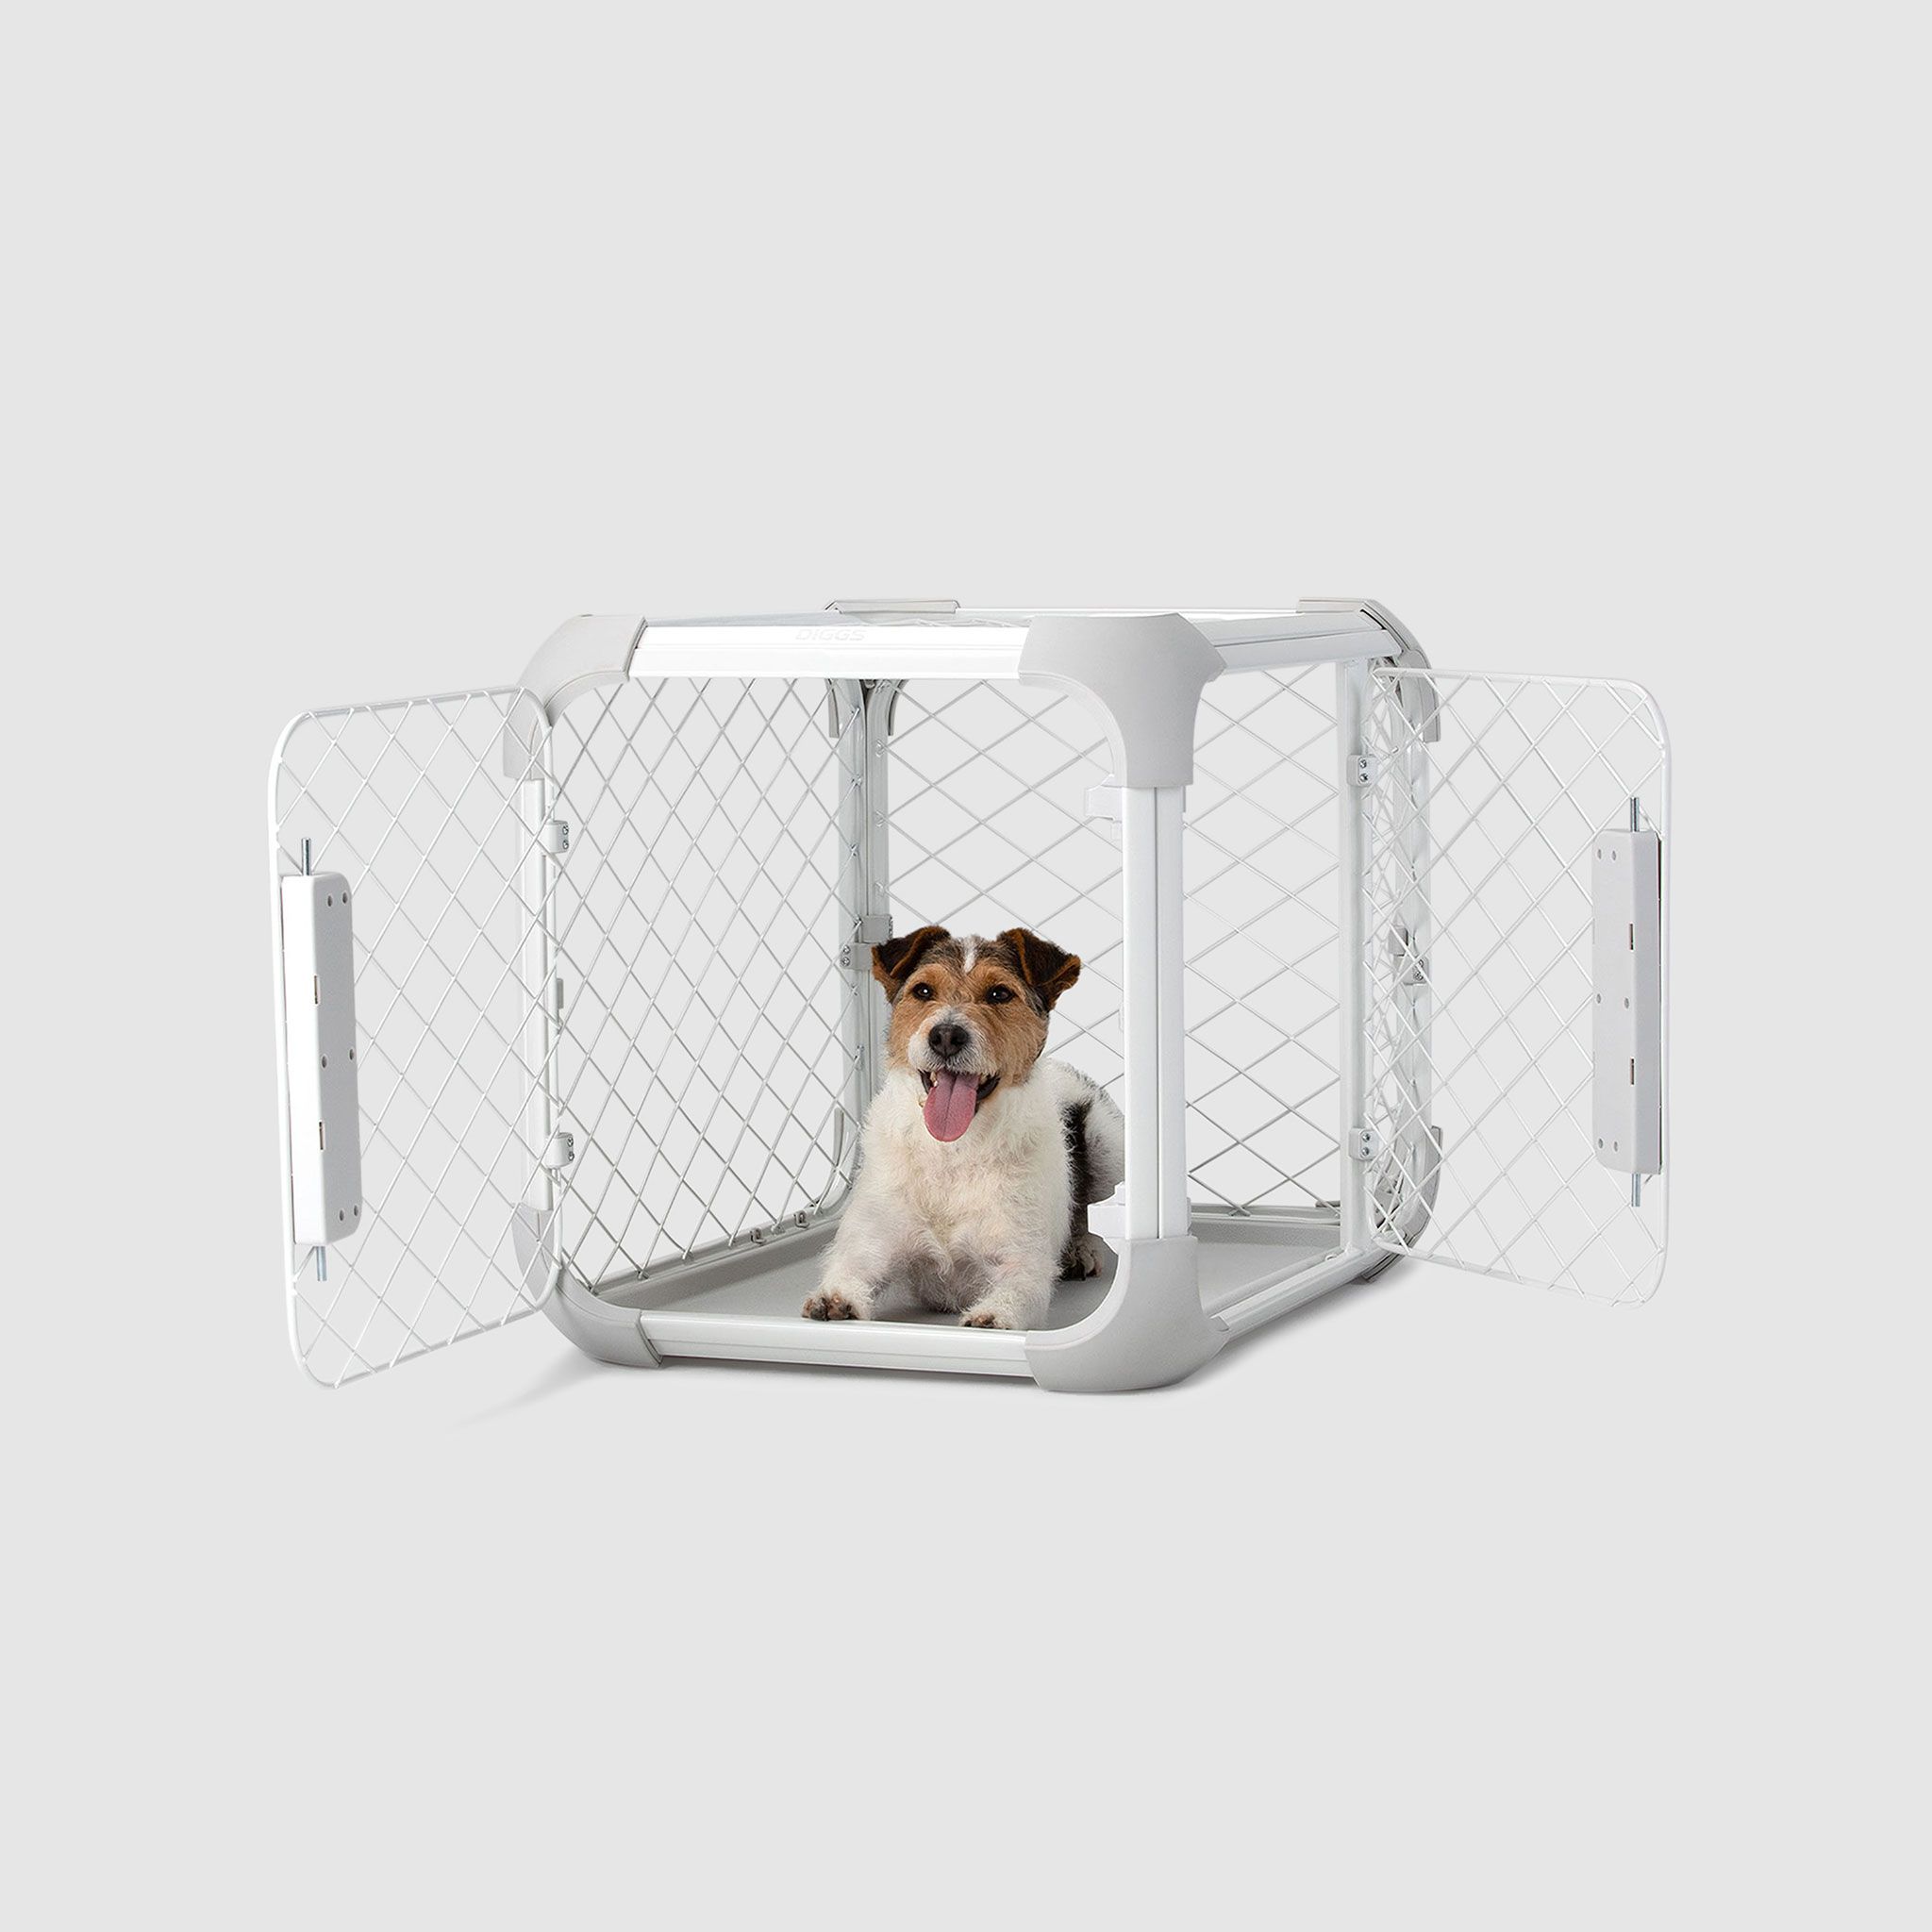 A dog sitting inside of a white dog crate